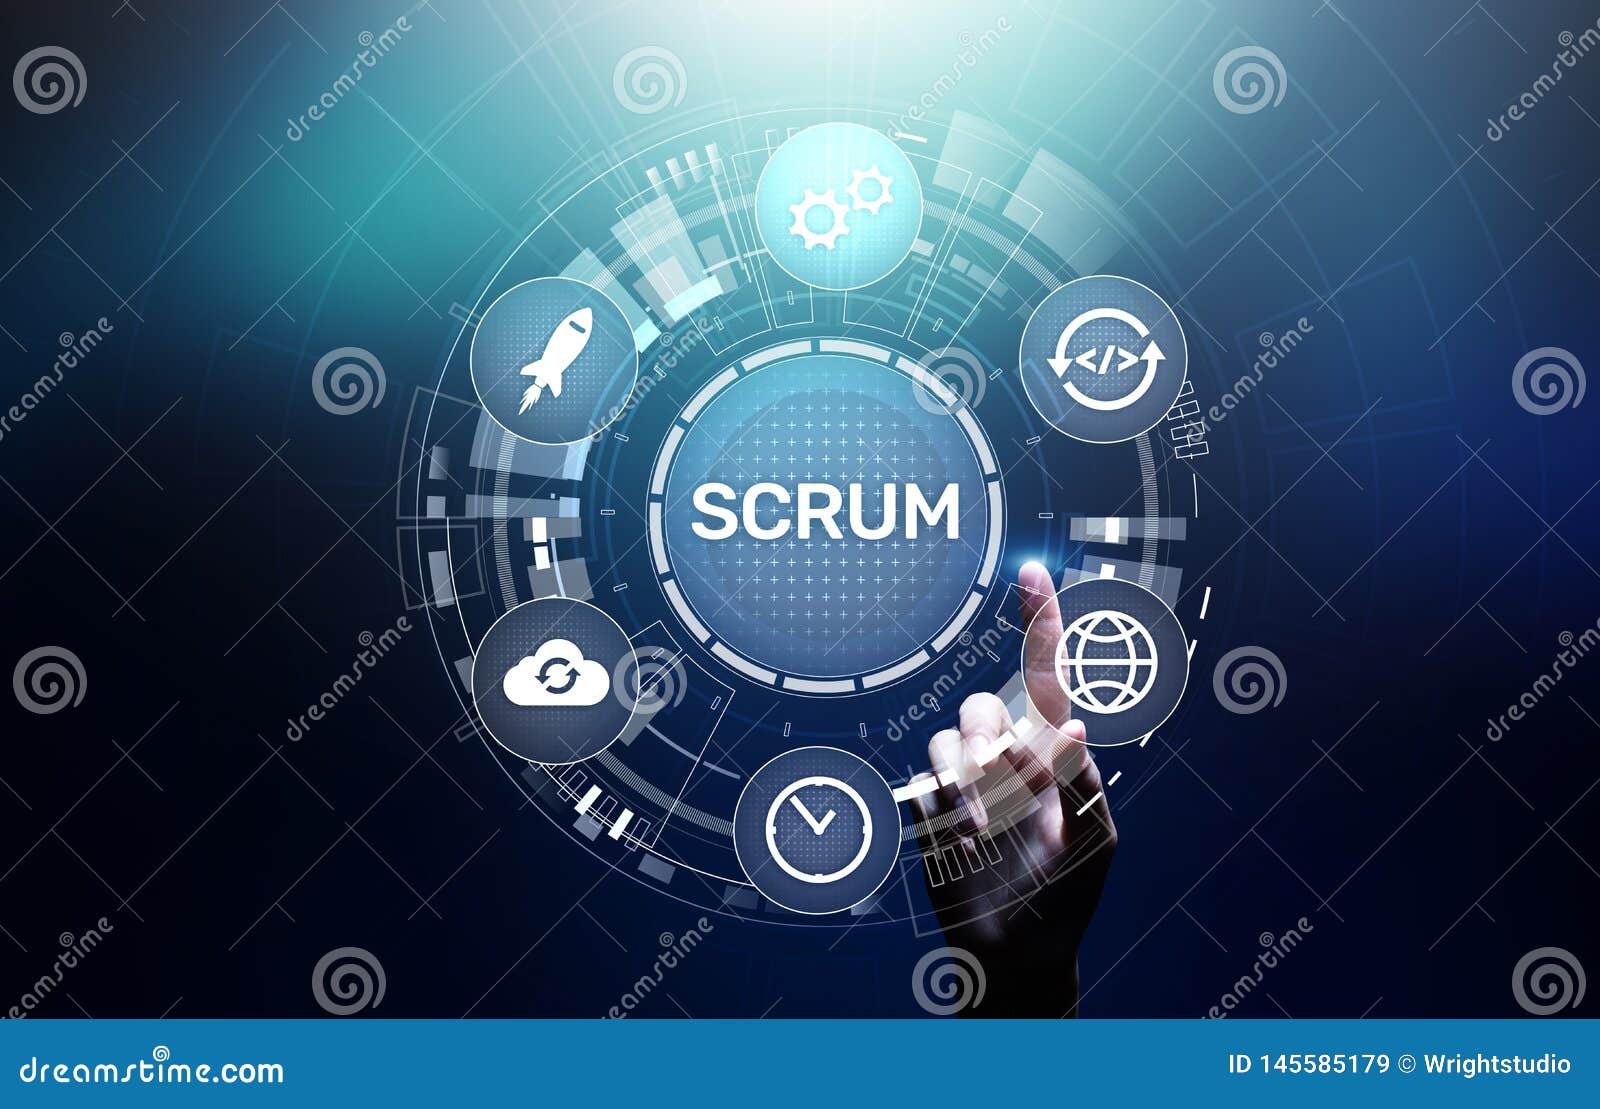 scrum, agile development methodology, programming and application  technology concept on virtual screen.